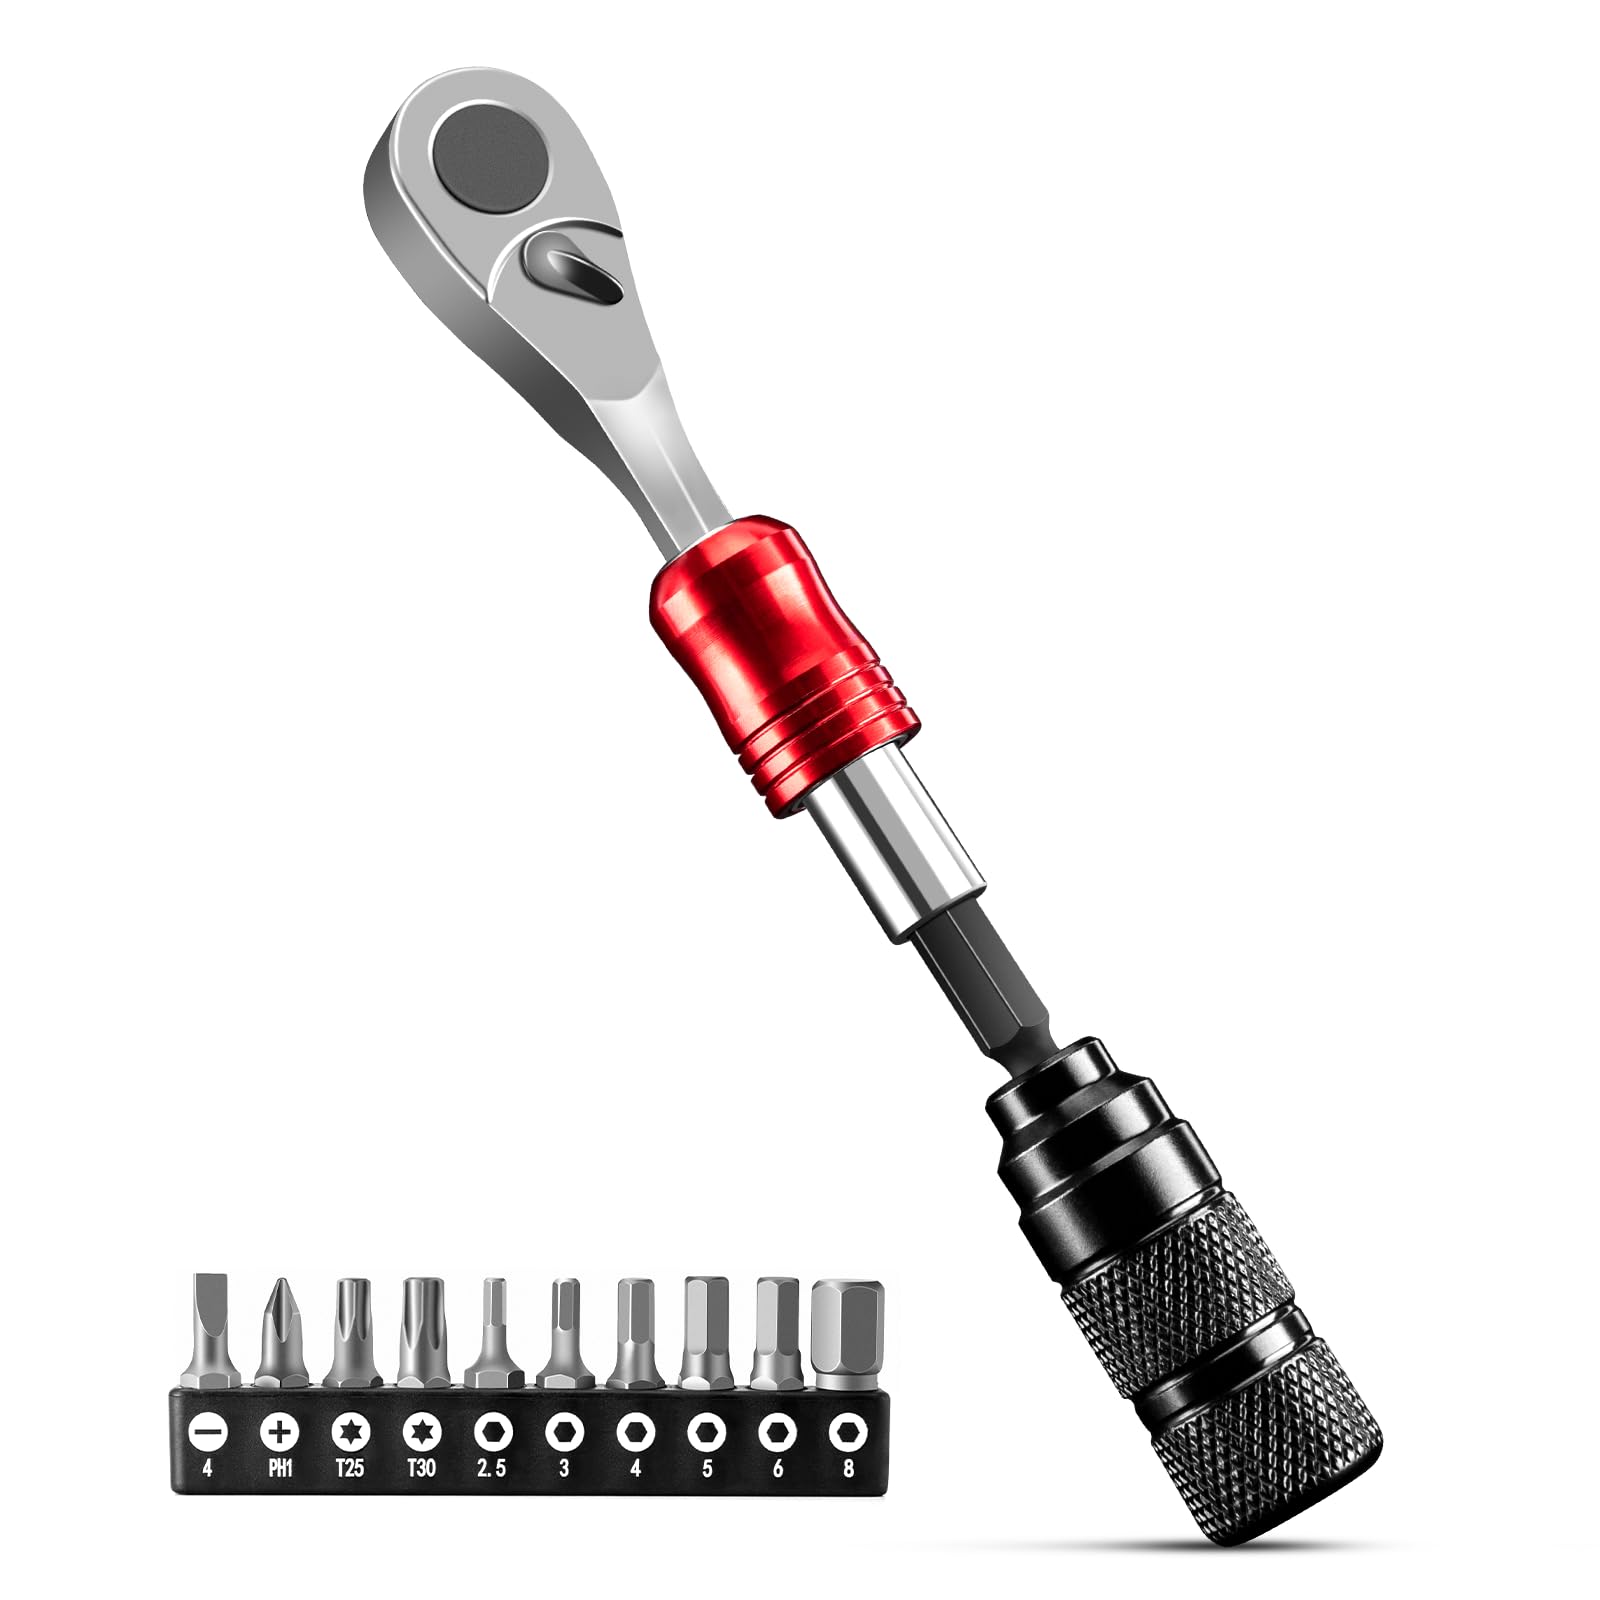 ROCKBROS Mini Ratchet Wrench with 10 Bits, Tire Wrench, and Magnetic Bits